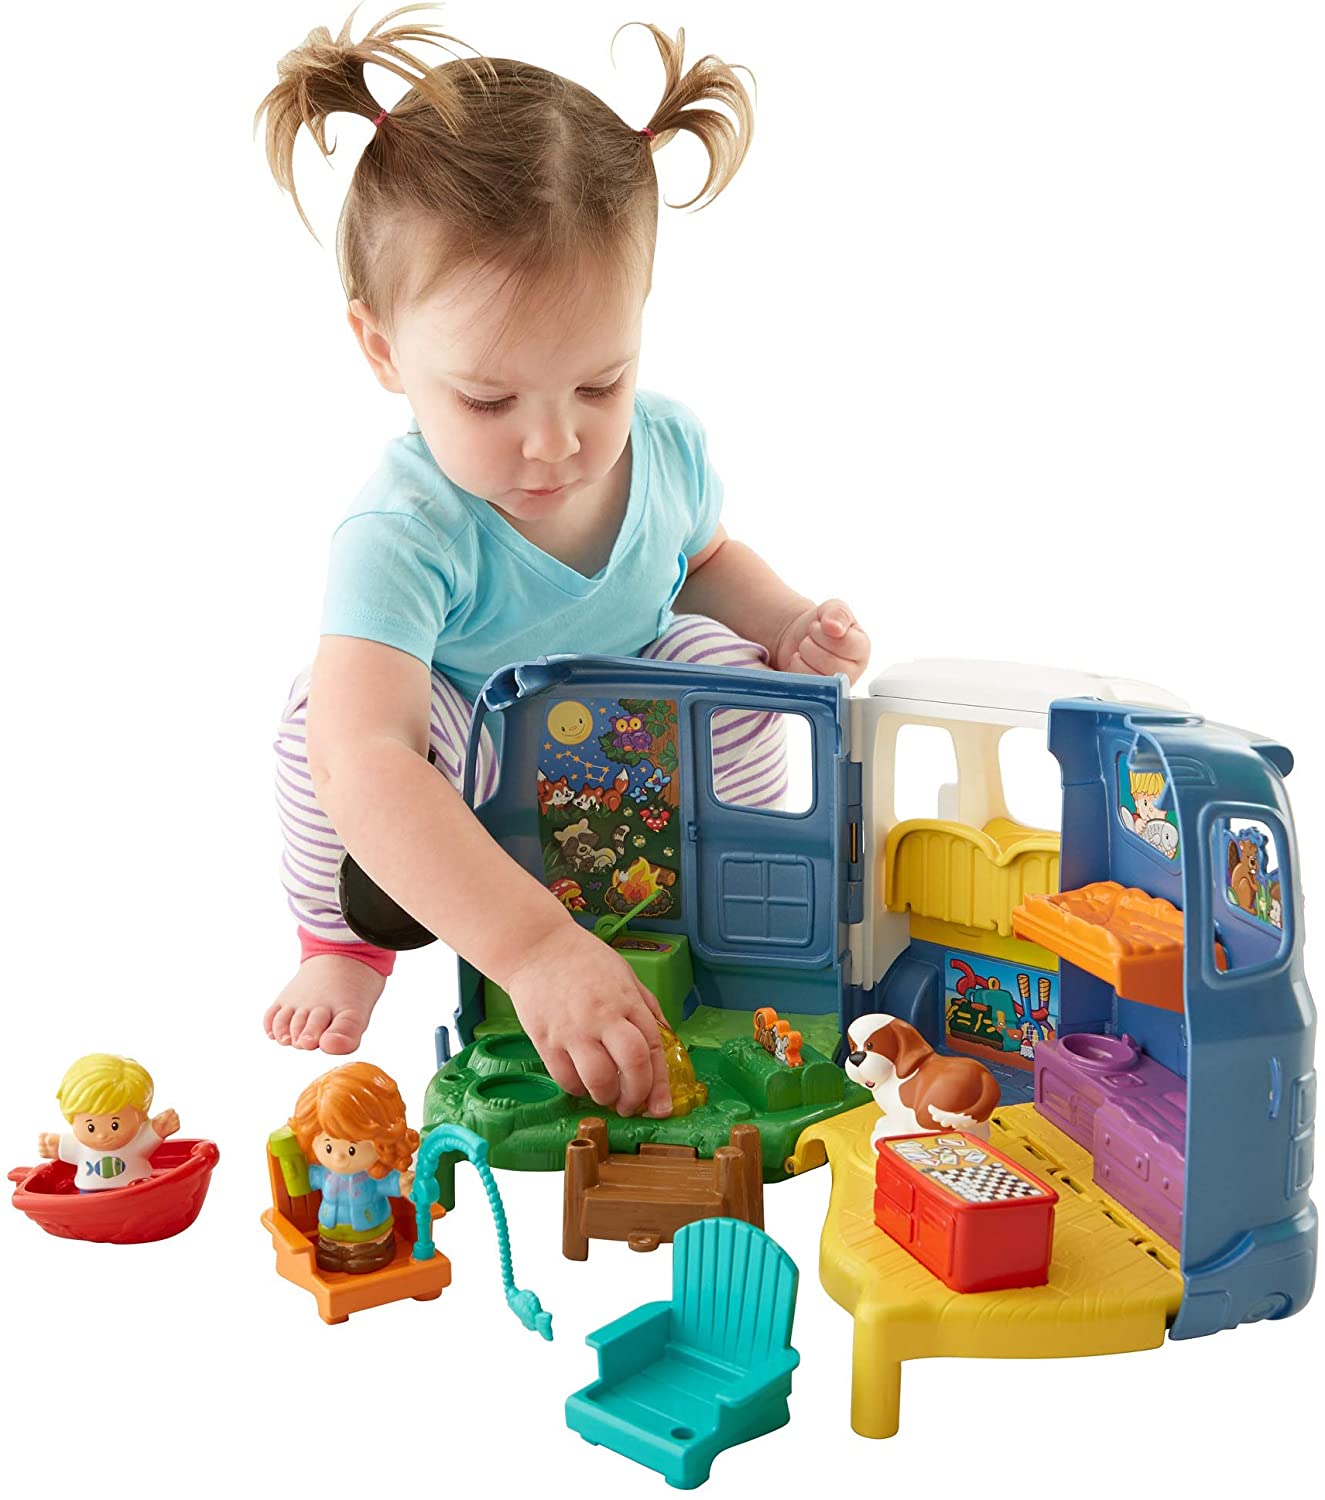 9 Best Fisher Price Little People Toys 2023 - Buying Guide 2